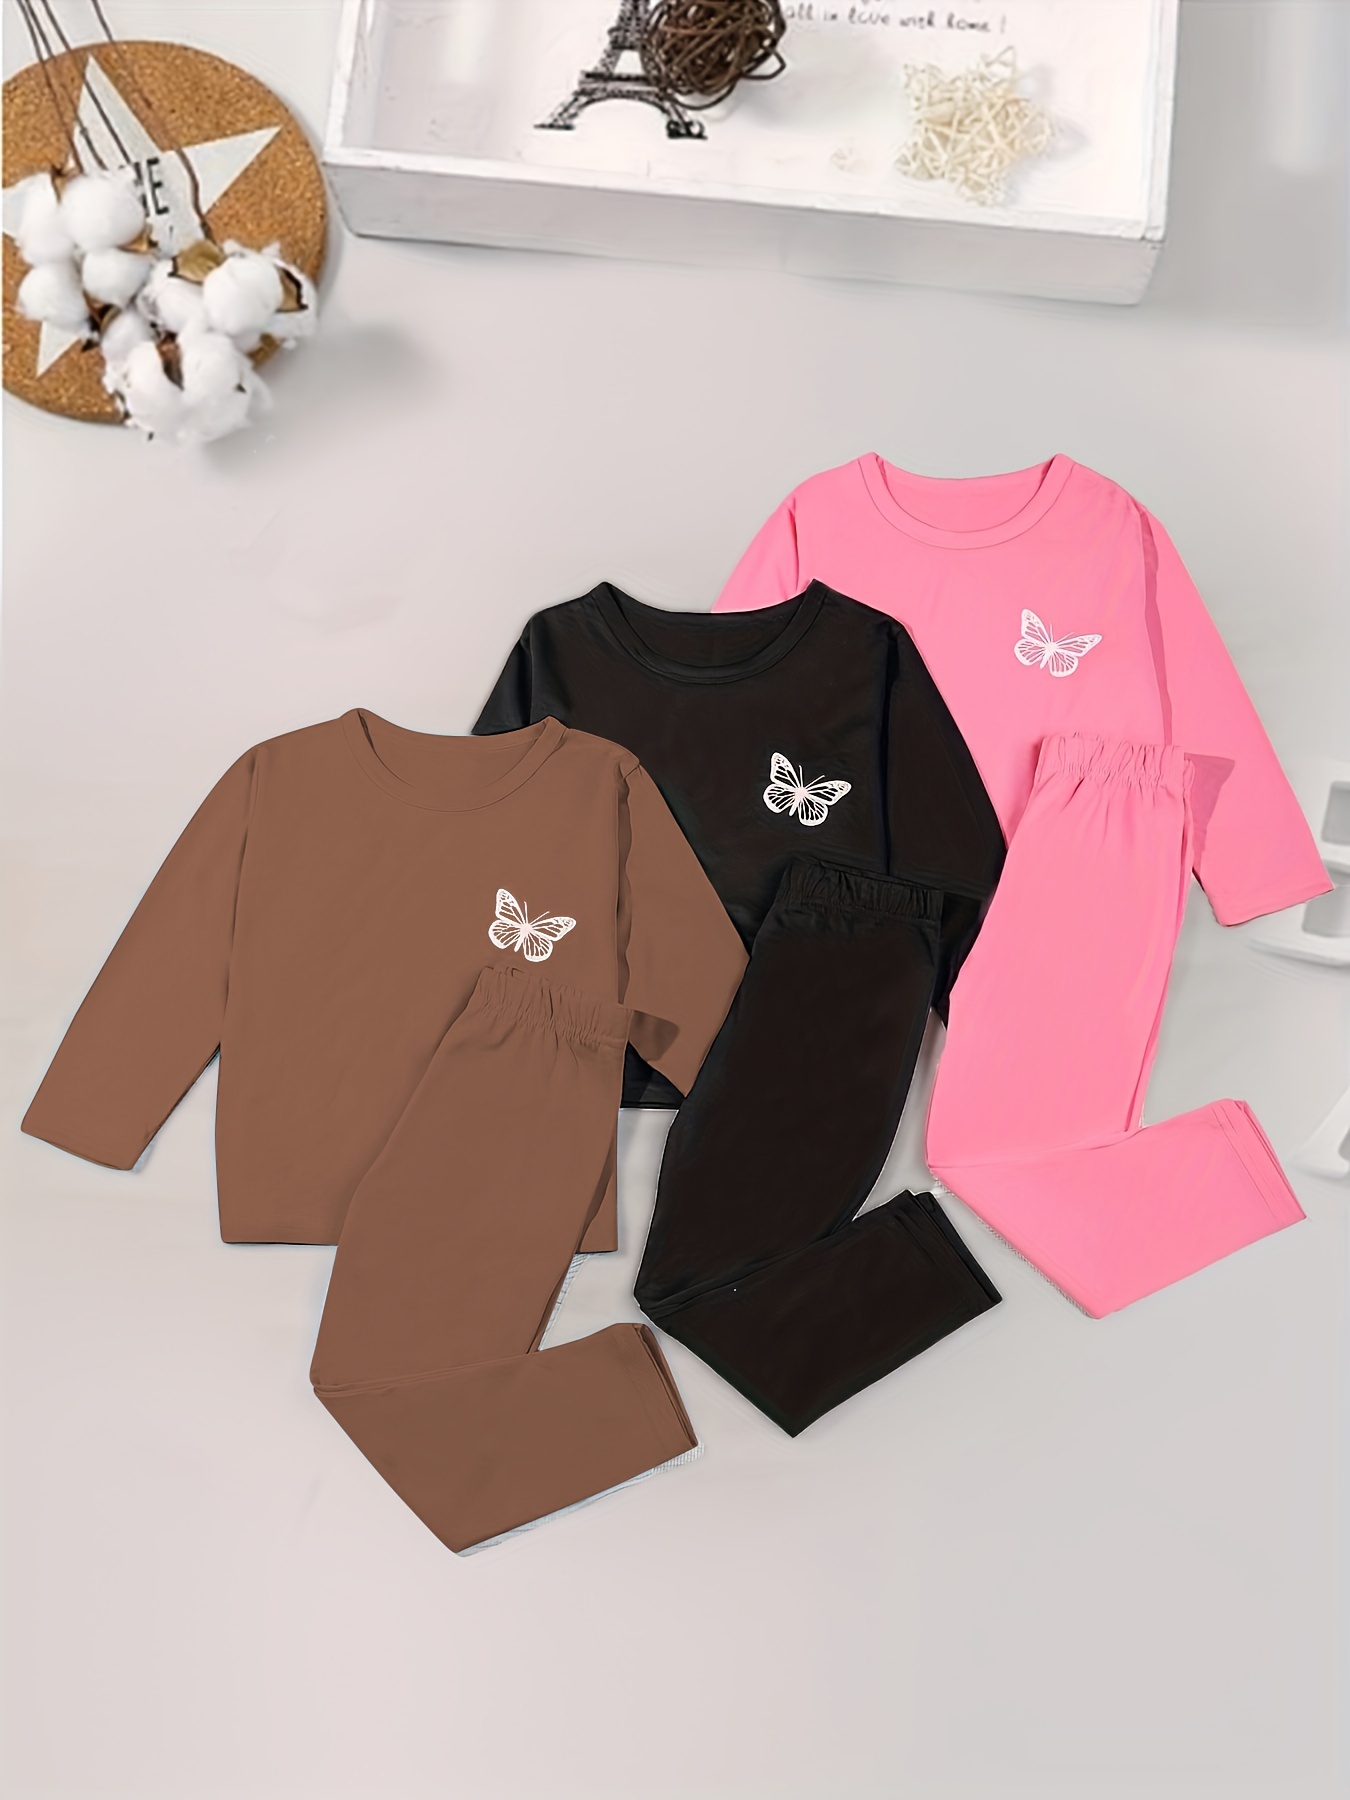 Kids Teens Girl Solid Girl's Clothing Set Fall Girl Outfits